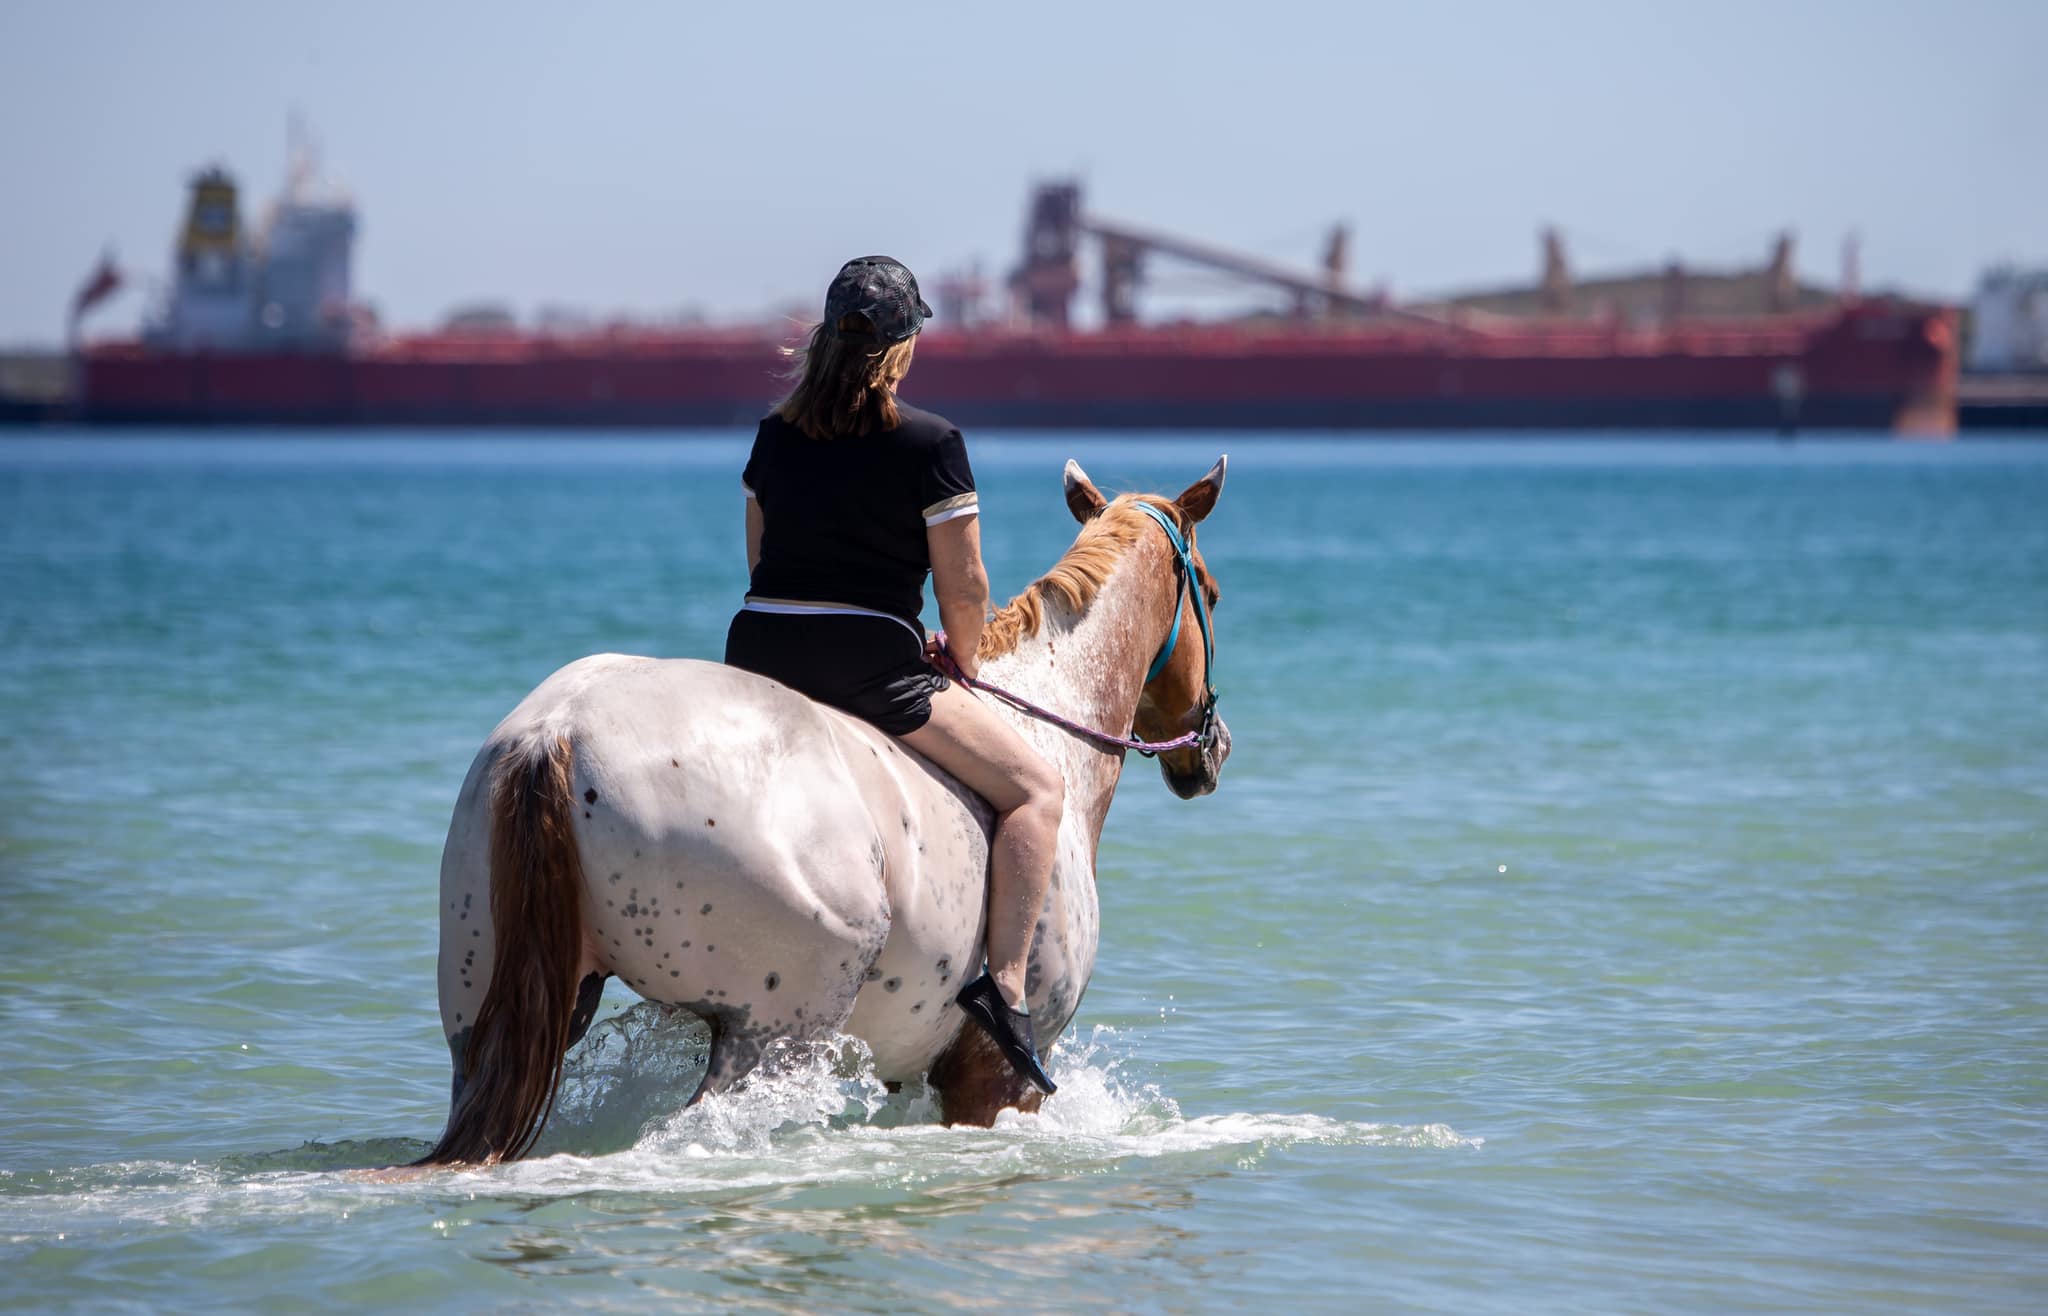 A person riding a horse in the water

Description automatically generated